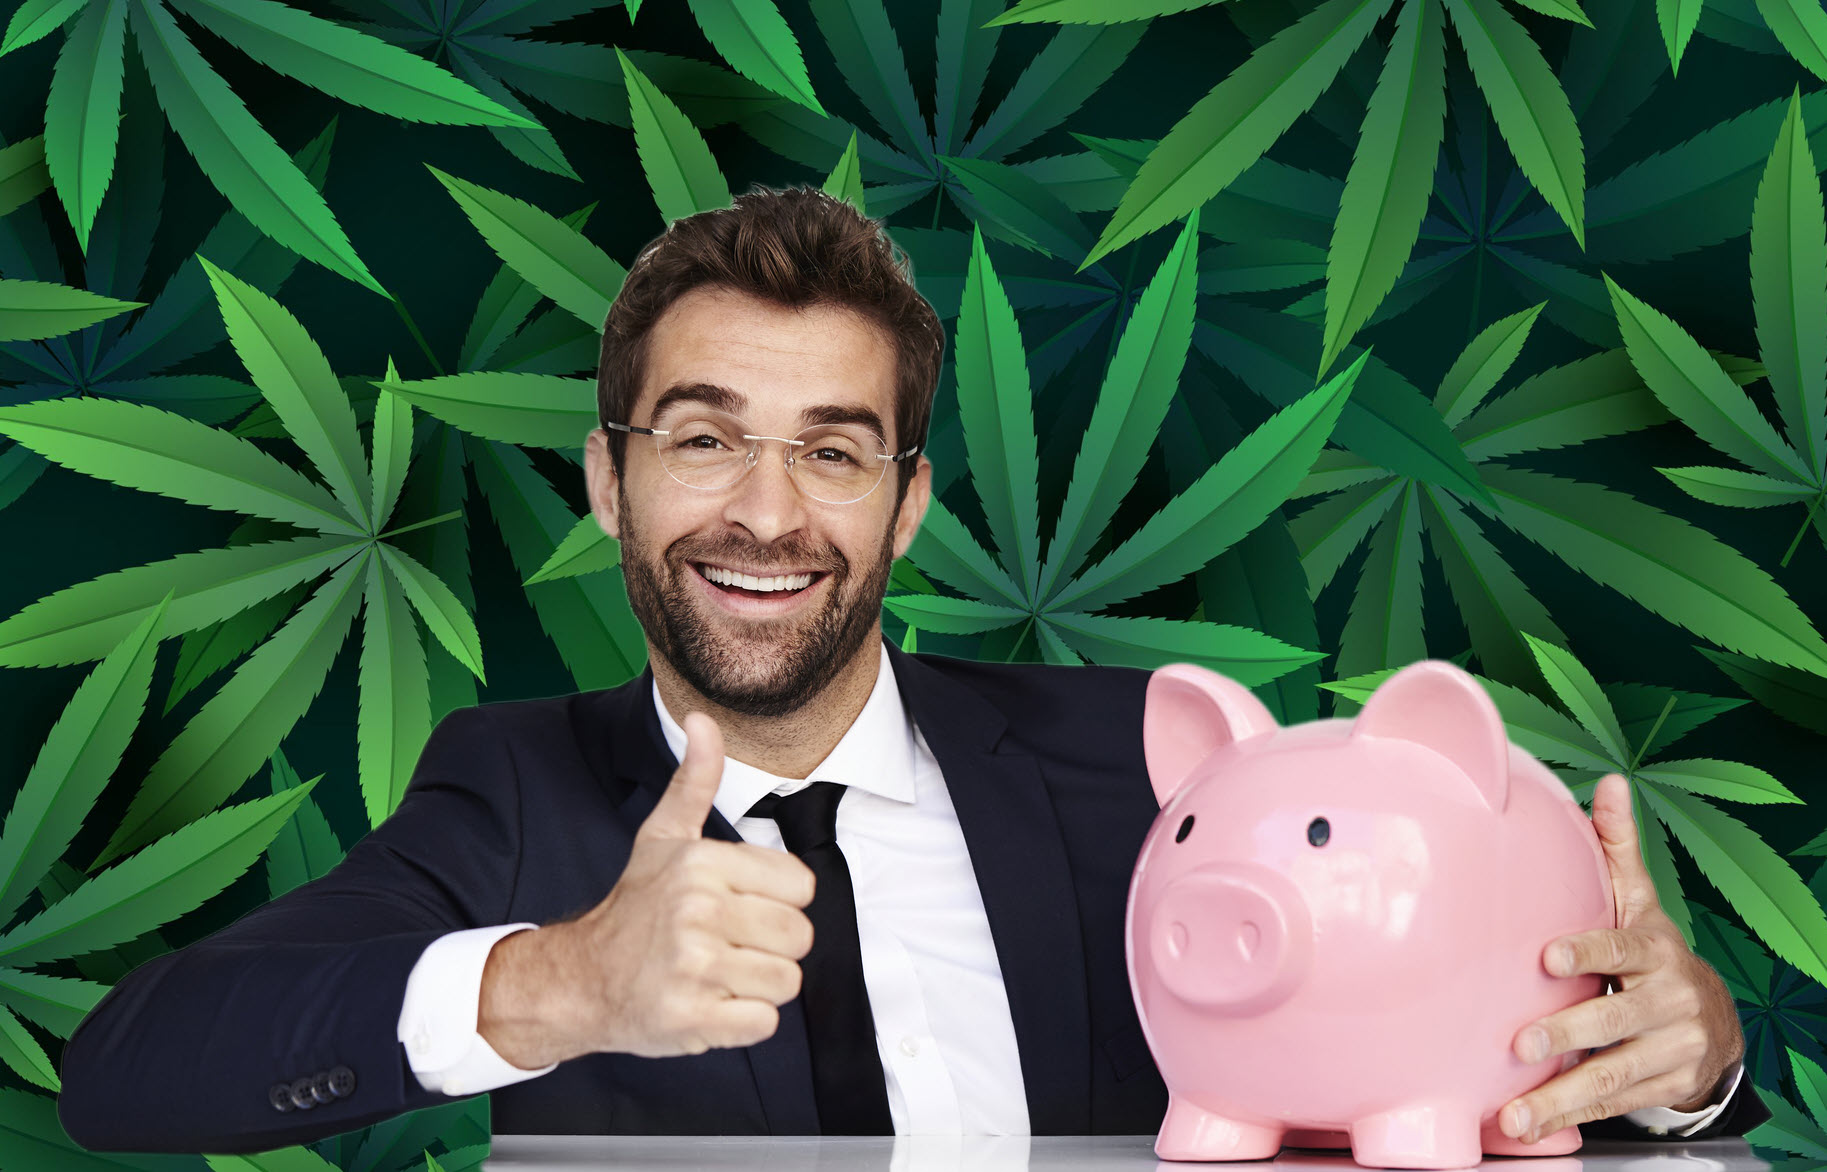 Guess Which Banks Now Want Cannabis Clients? – Over 800 Banks File FinCEN Reports to Accept Marijuana Businesses